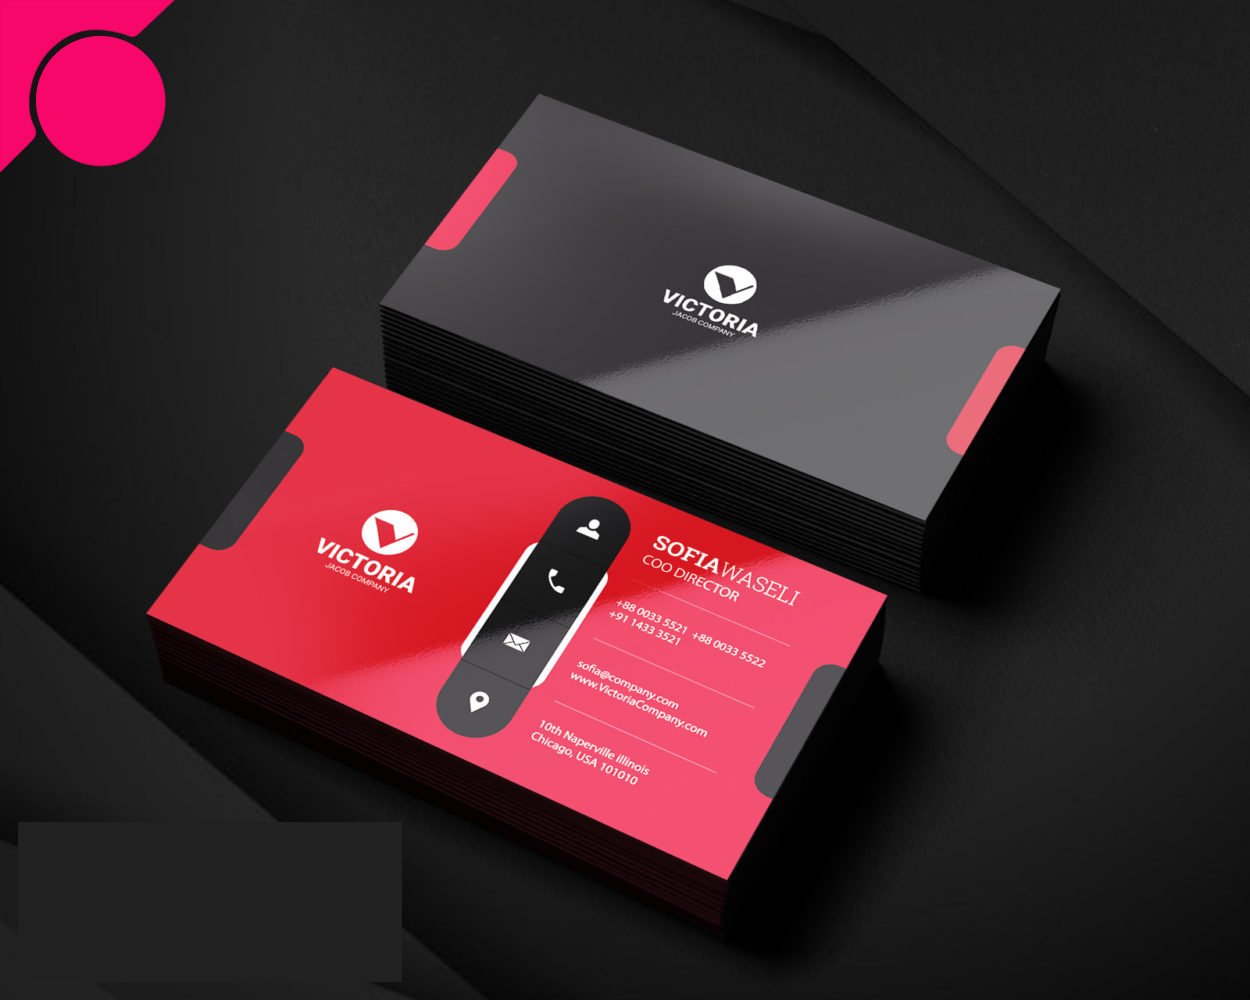 Design professional business cards for you for $20 - SEOClerks